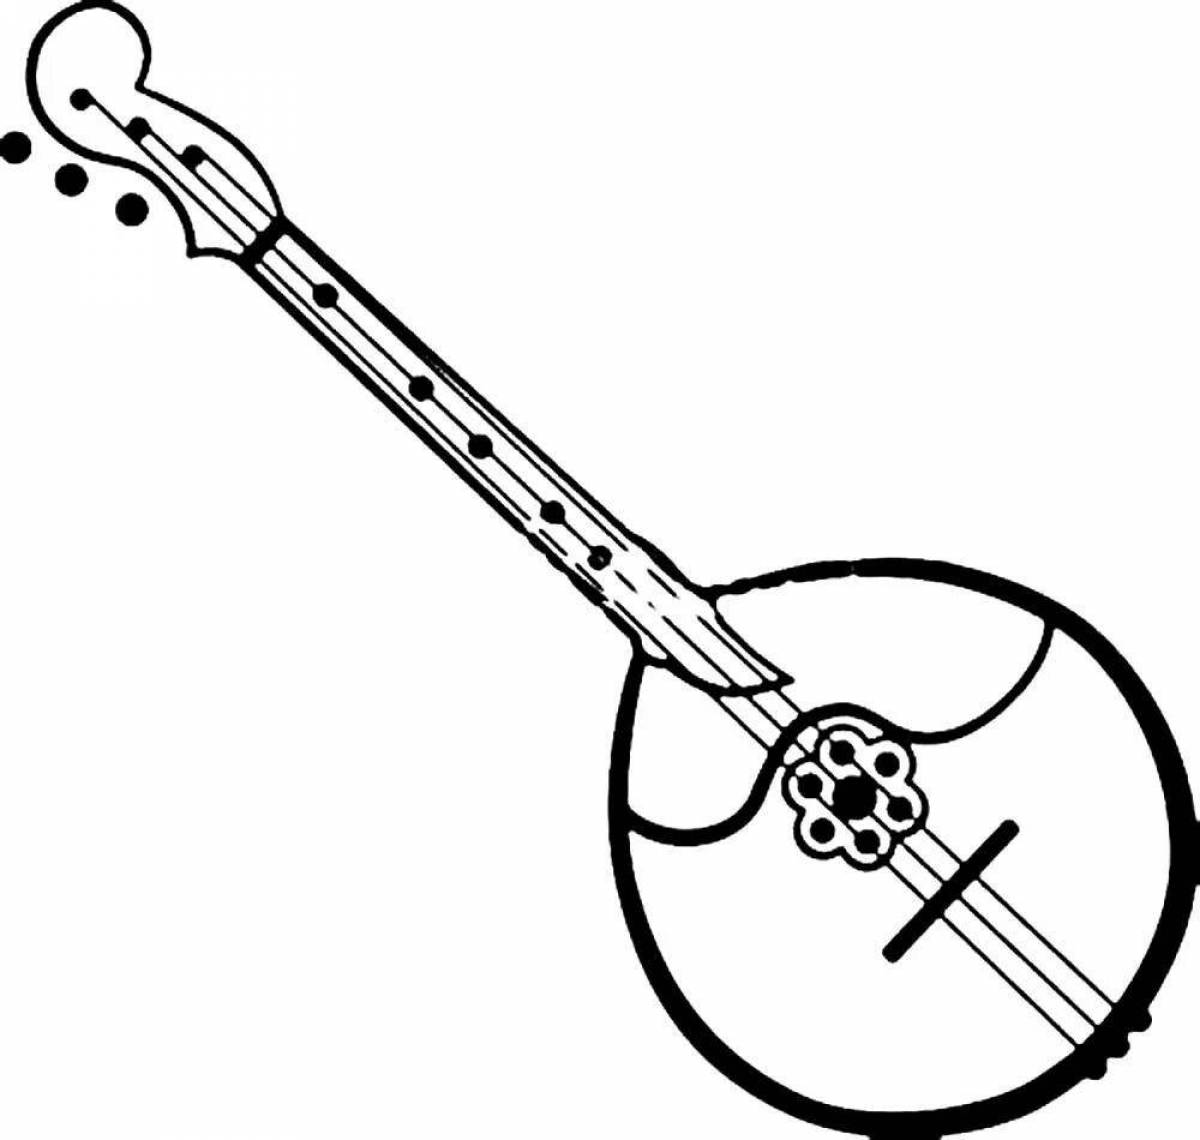 Fancy folk musical instruments coloring pages for kids